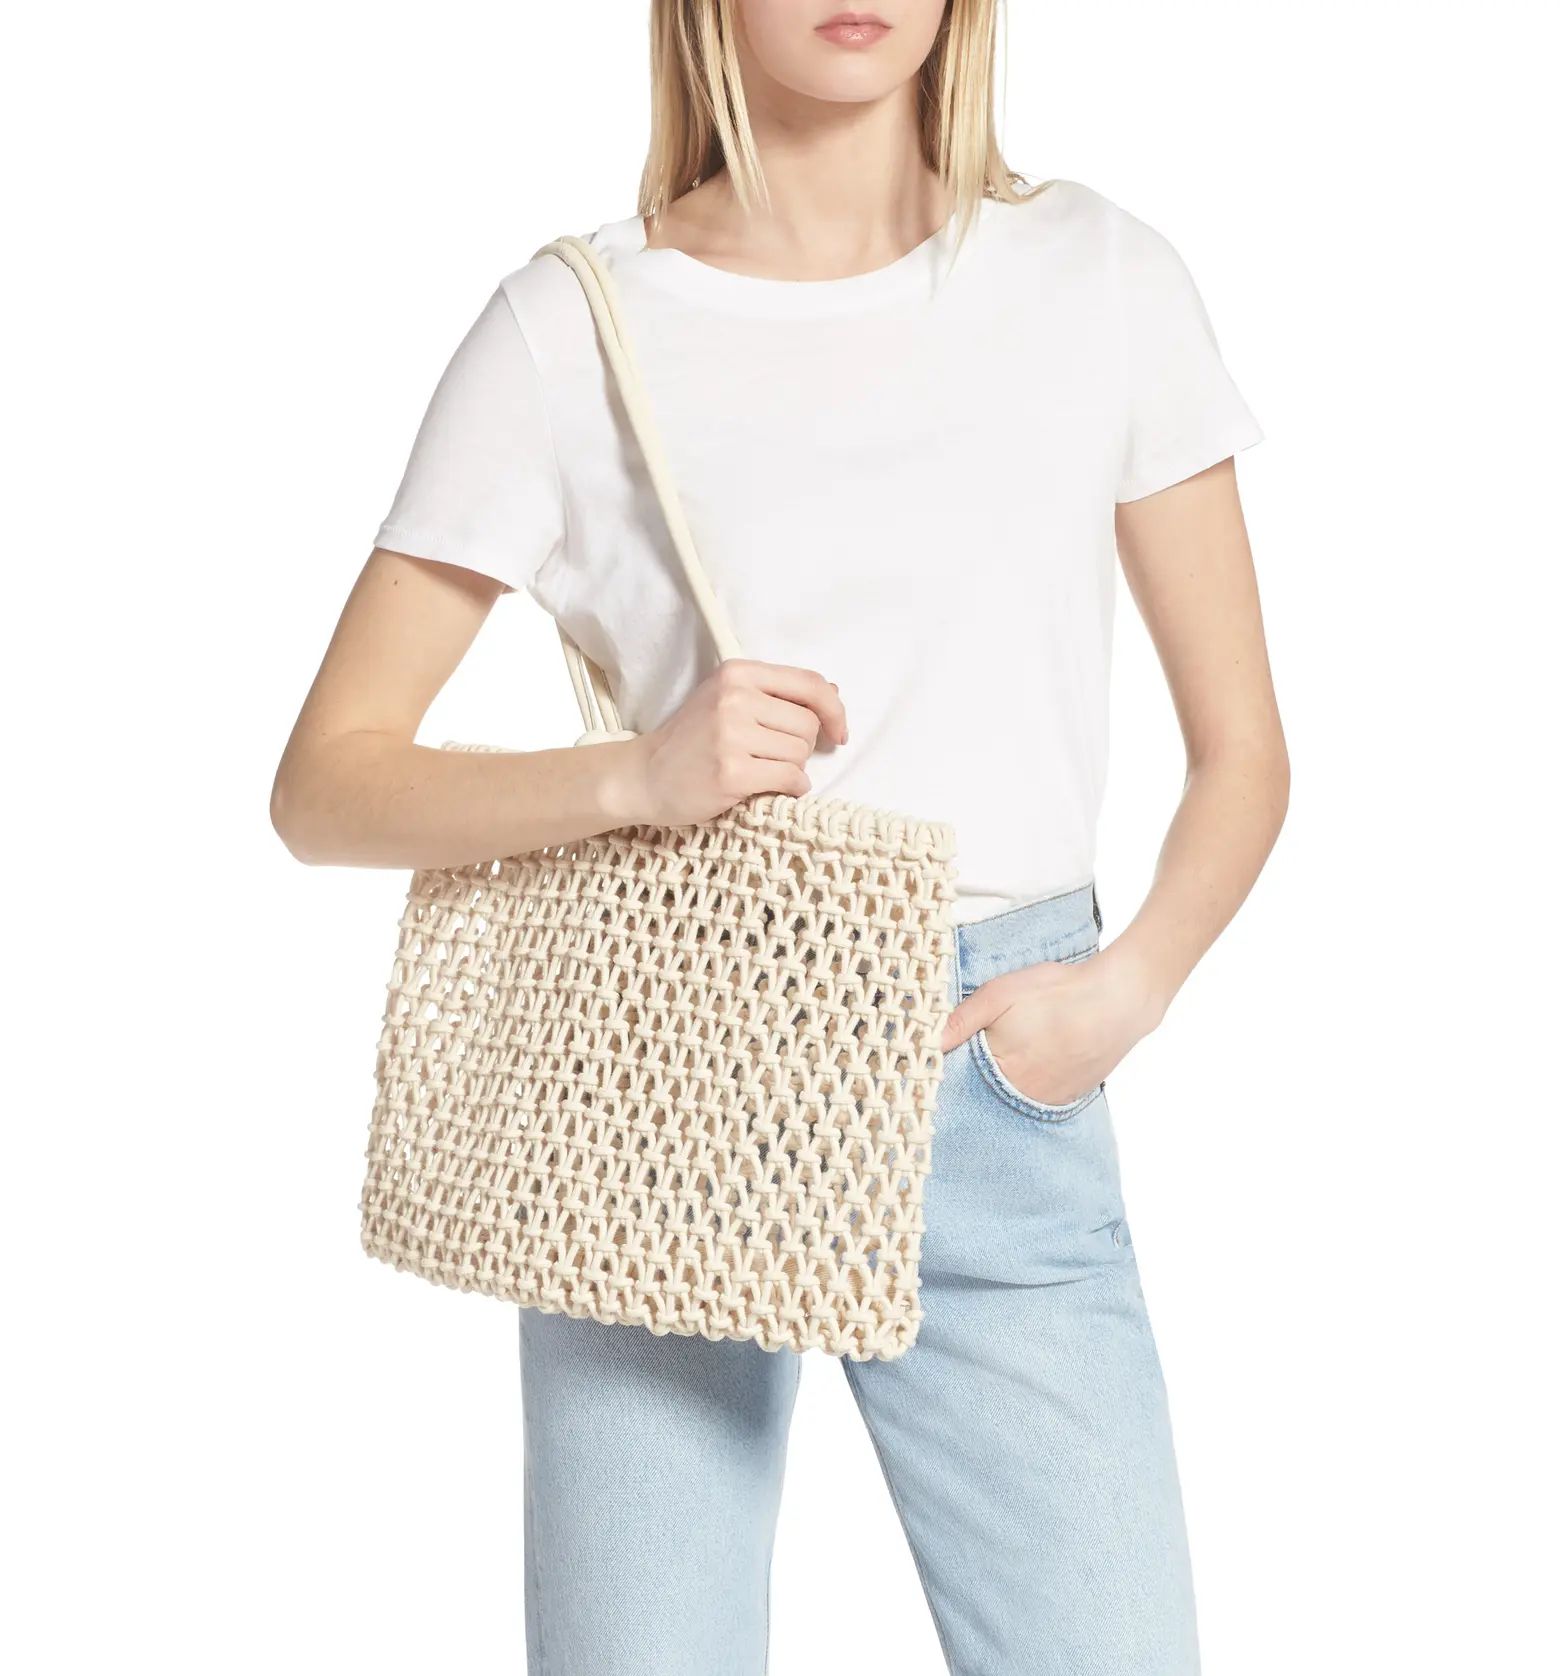 Sandy Woven Market Tote | Nordstrom